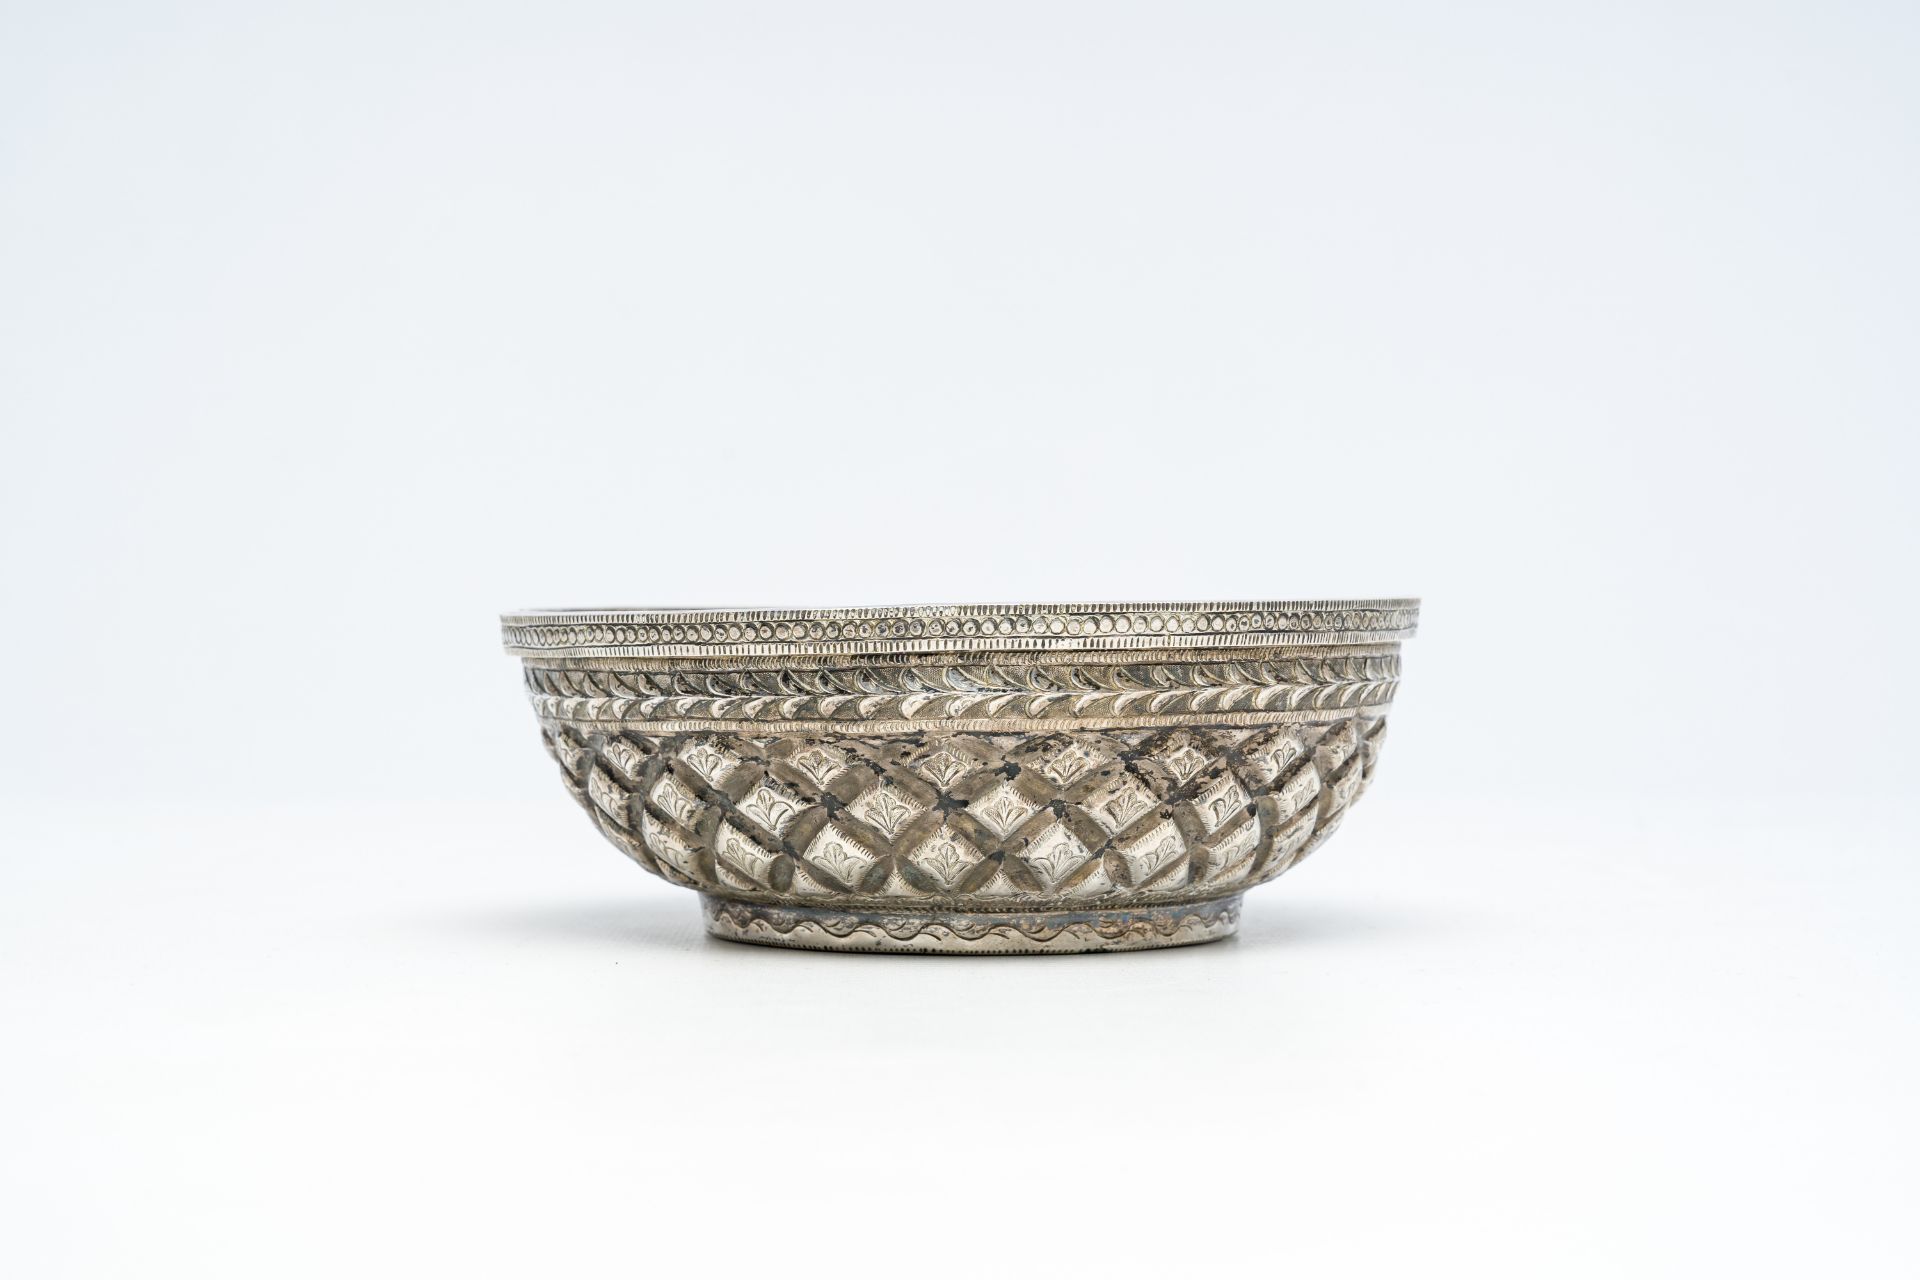 A Southeast Asian silver bowl, probably Laos or Sri Lanka, 19th/20th C. - Image 3 of 7